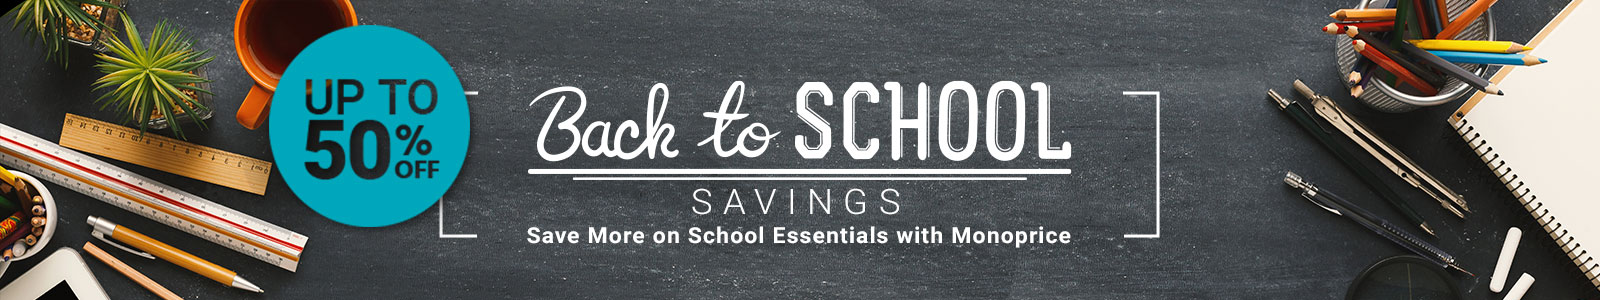 Back To School Savings
Save More on School Essentials with Monoprice
Up To 50% off
Shop Now